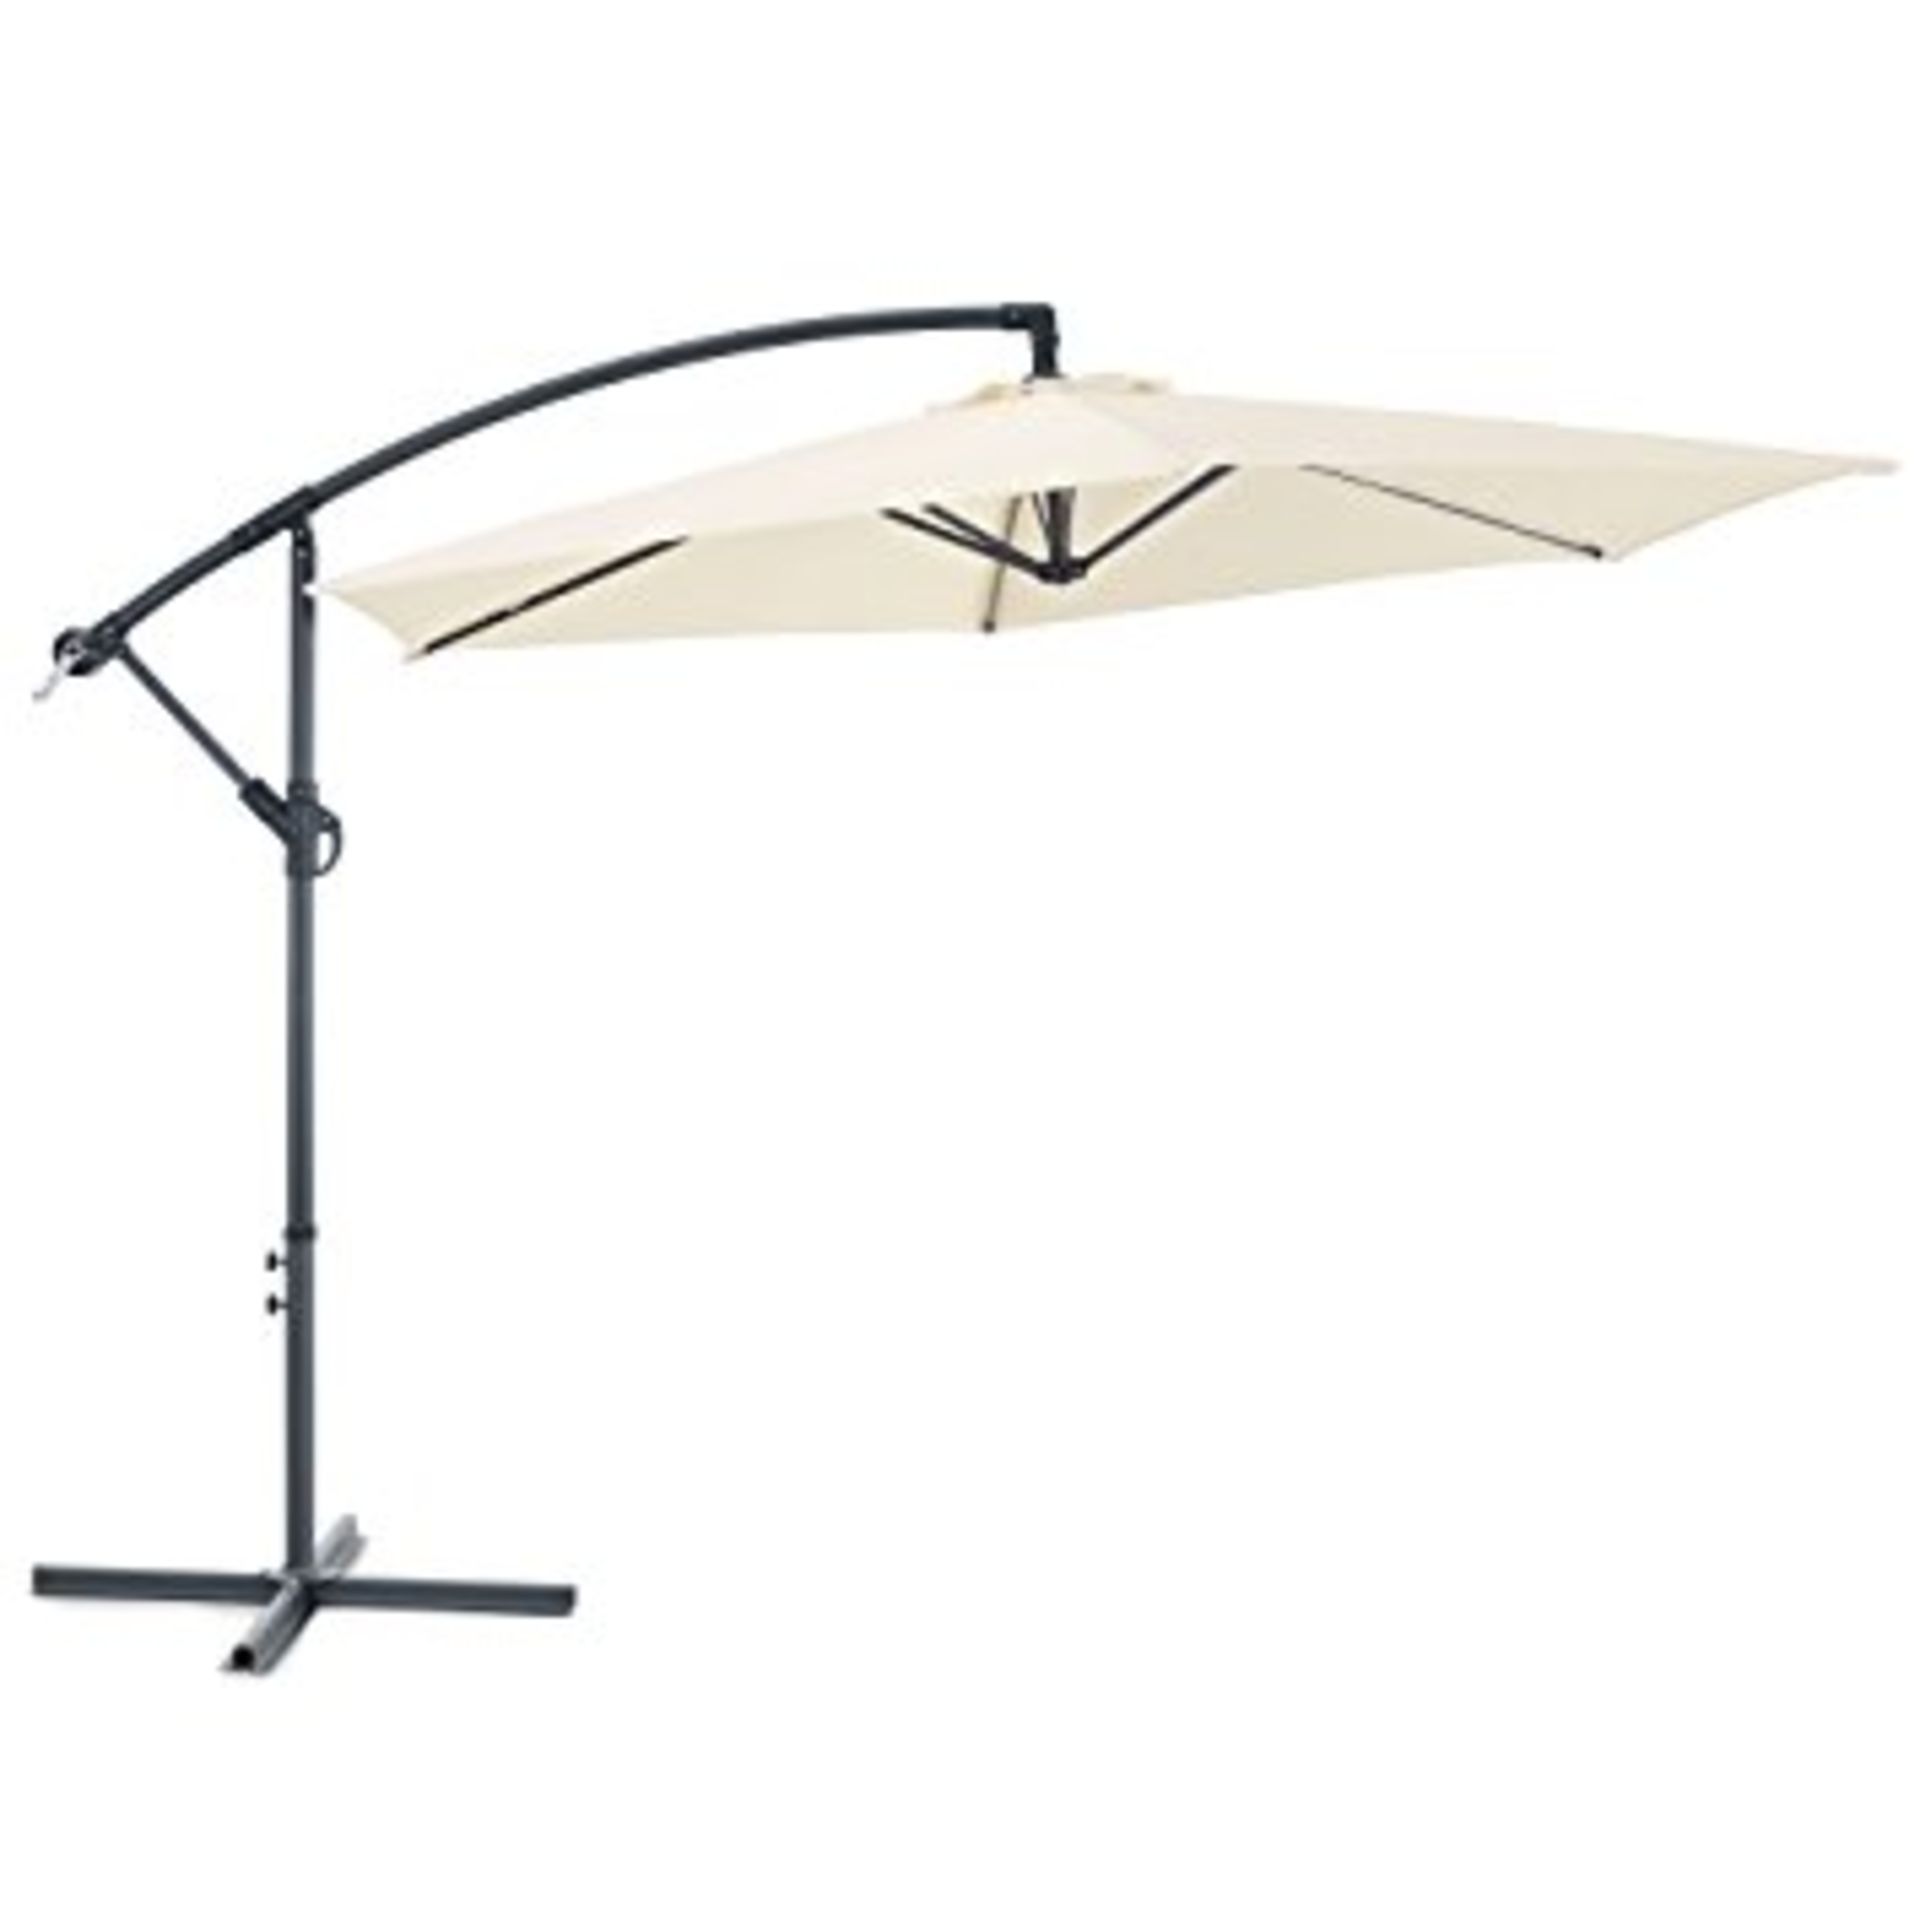 V Brand New 3m Ivory Cantilever Lean Over Parsol With Cross Stand - Item May Vary Slightly From